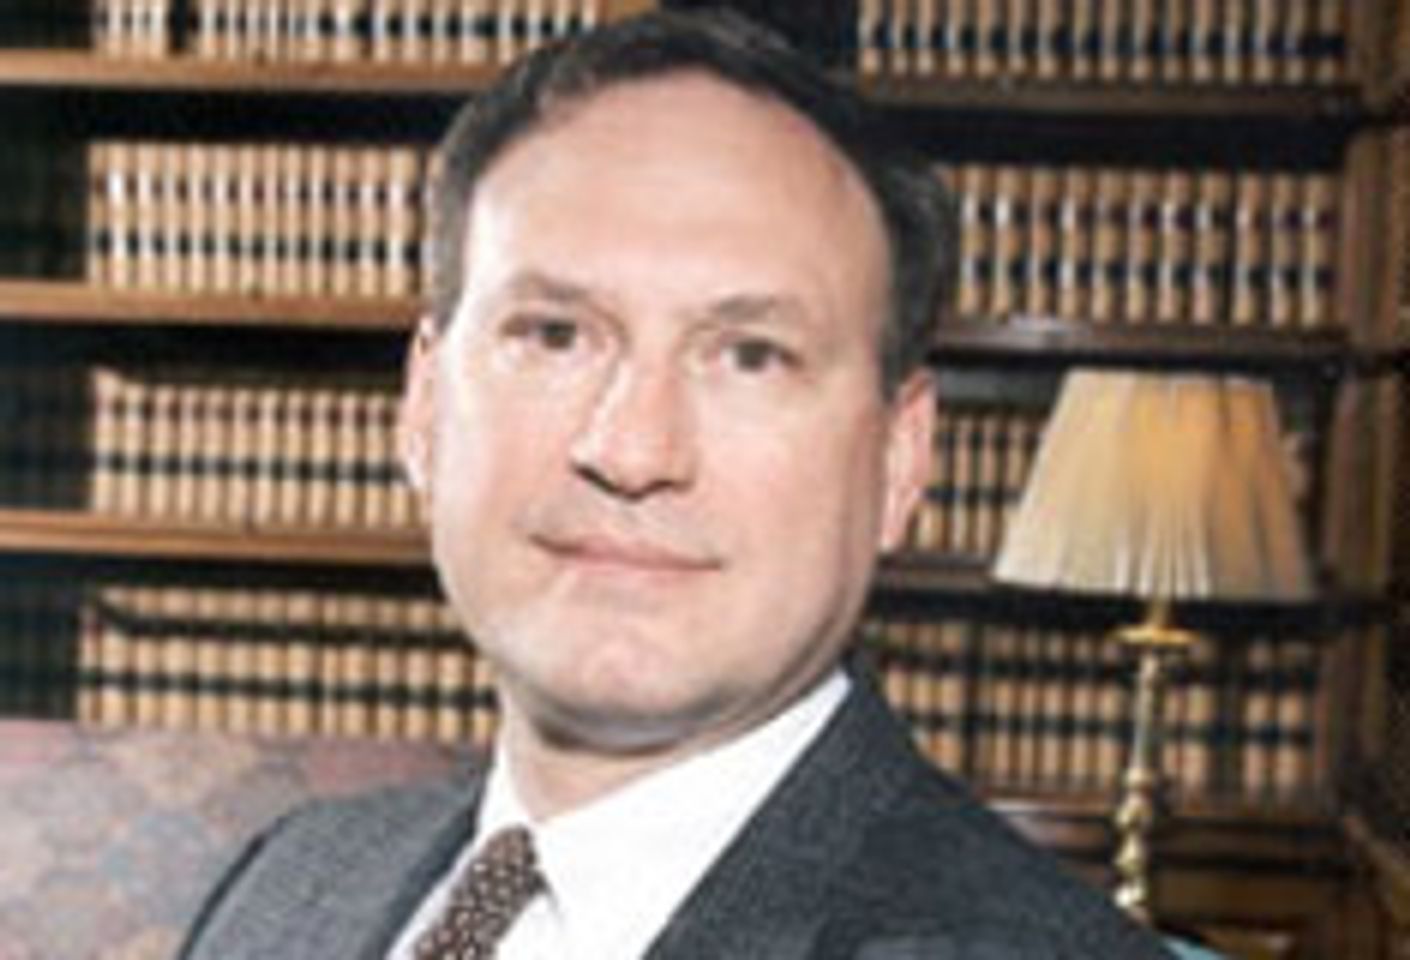 Justice Alito Hires Trusted Conservatives